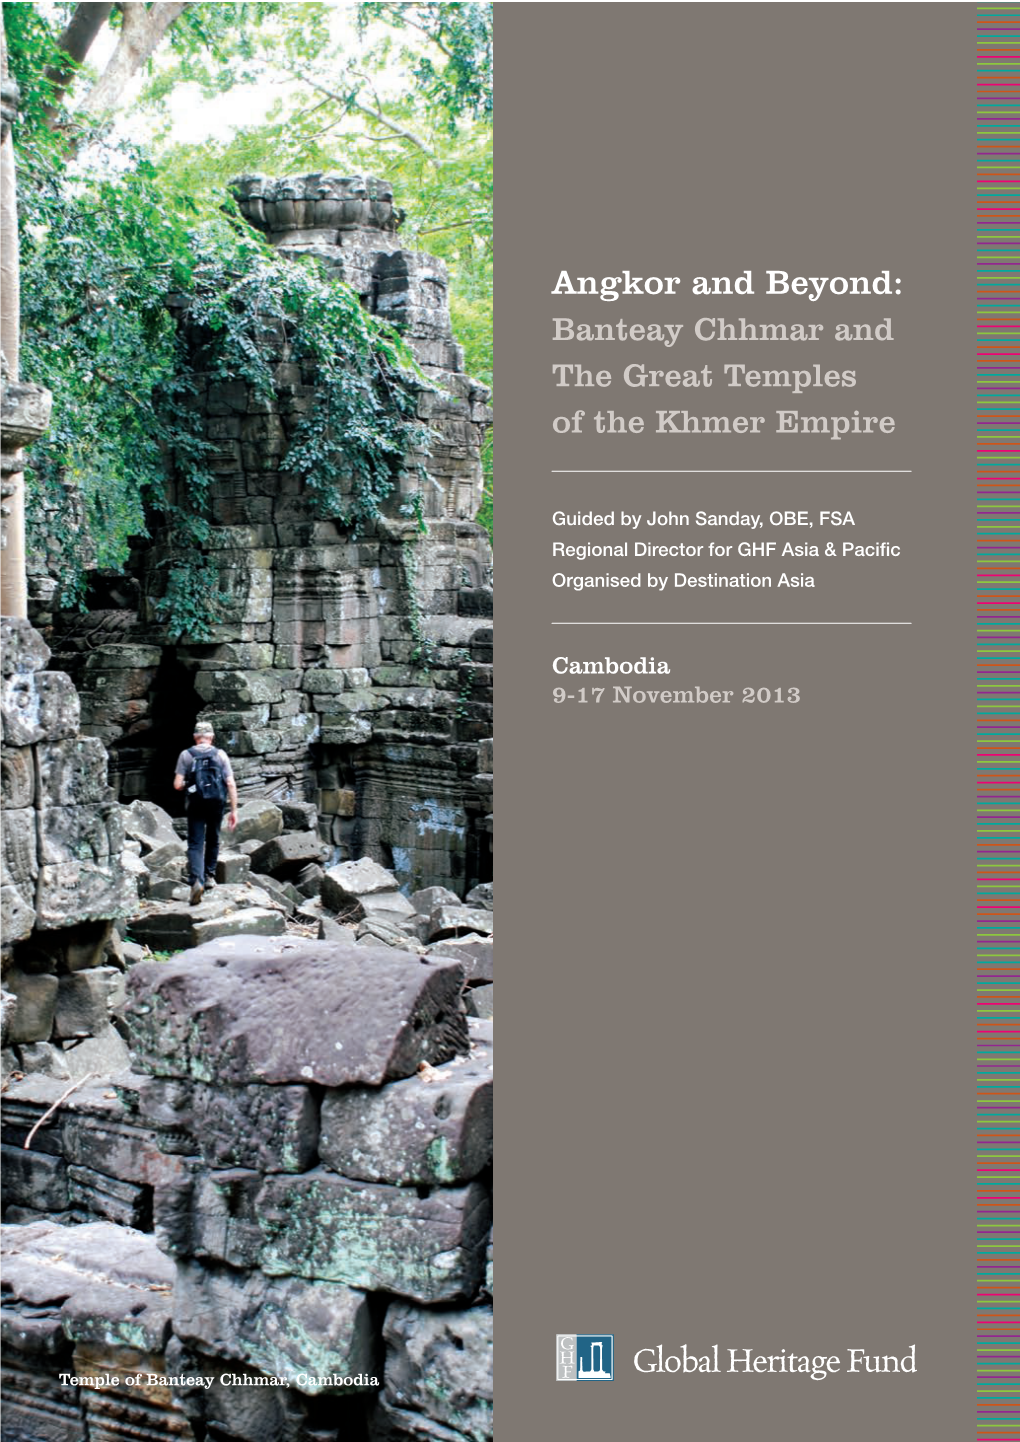 Angkor and Beyond: Banteay Chhmar and the Great Temples of the Khmer Empire